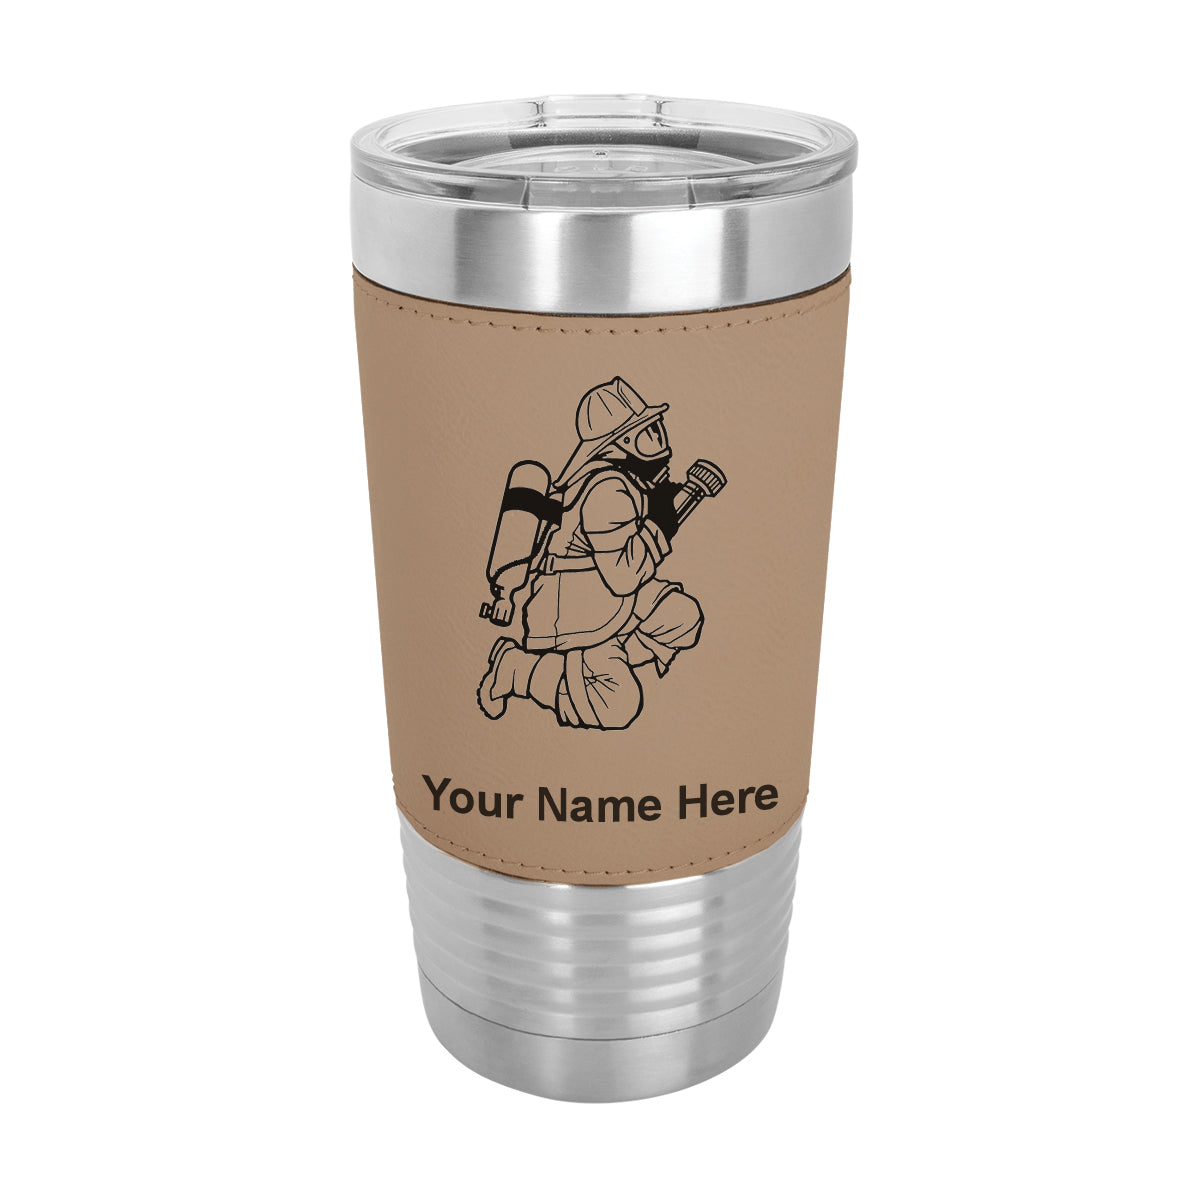 20oz Faux Leather Tumbler Mug, Fireman with Hose, Personalized Engraving Included - LaserGram Custom Engraved Gifts